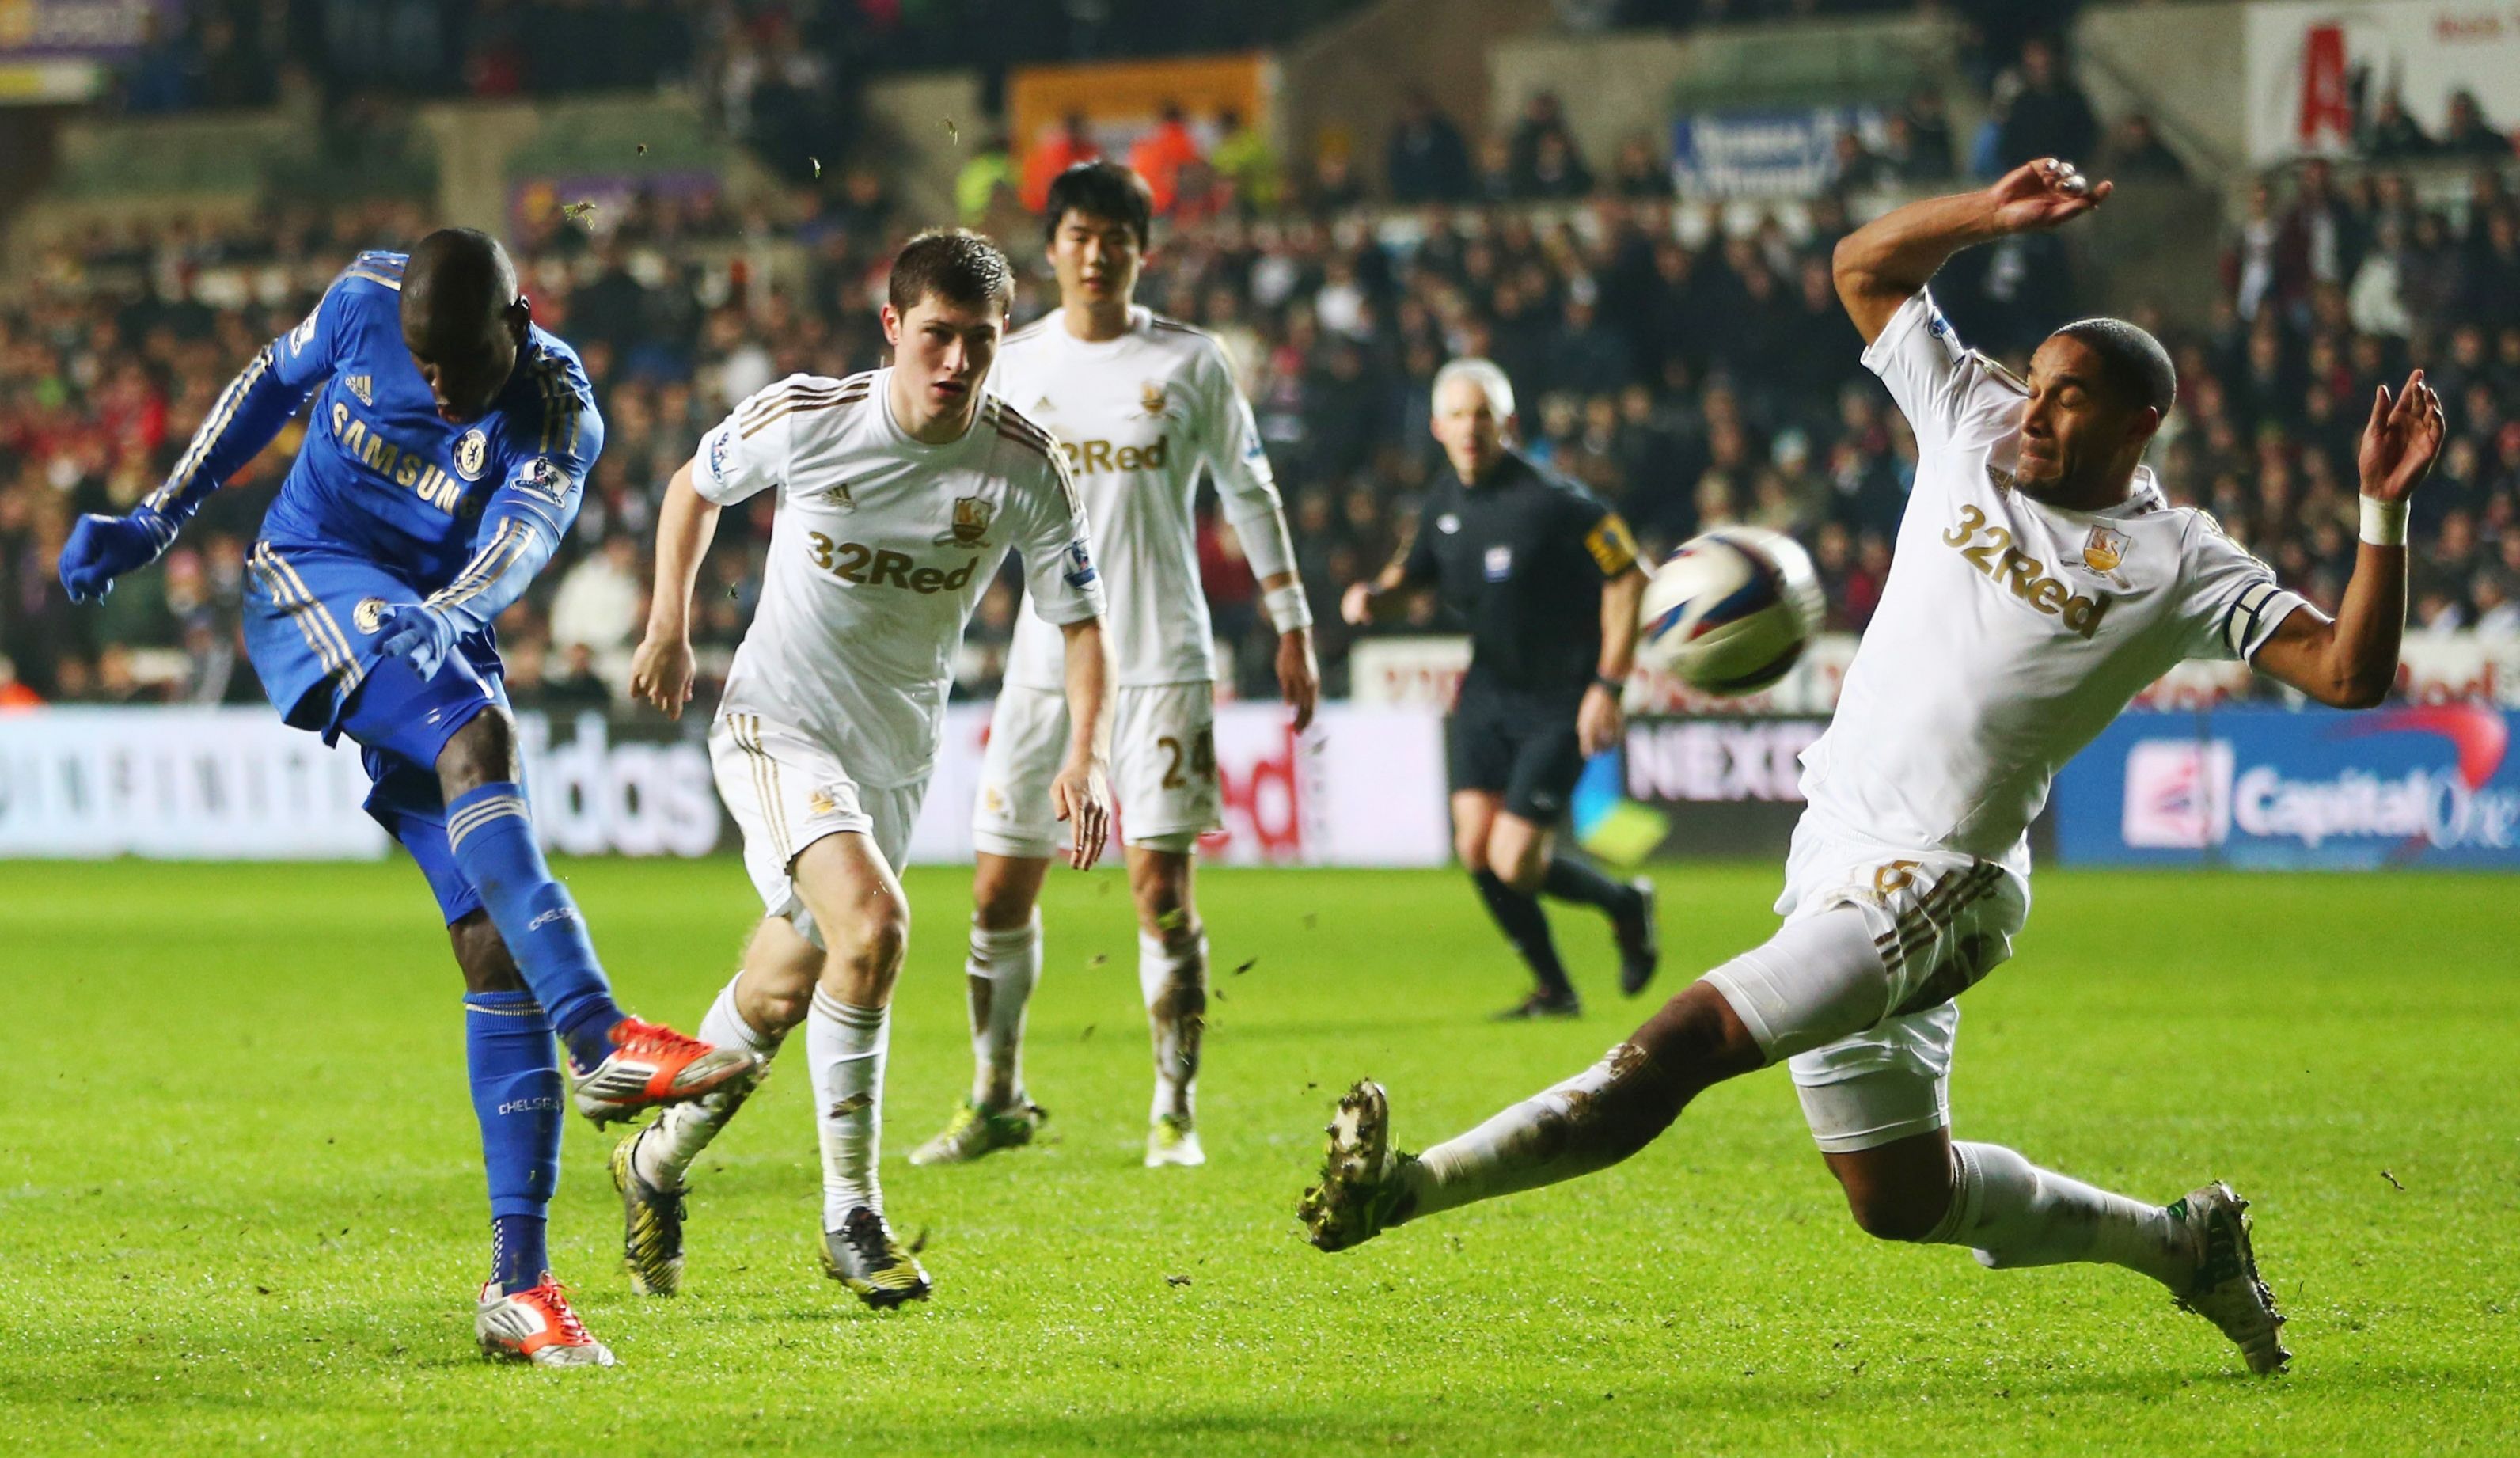 Football club Swansea City wallpapers and images - wallpapers